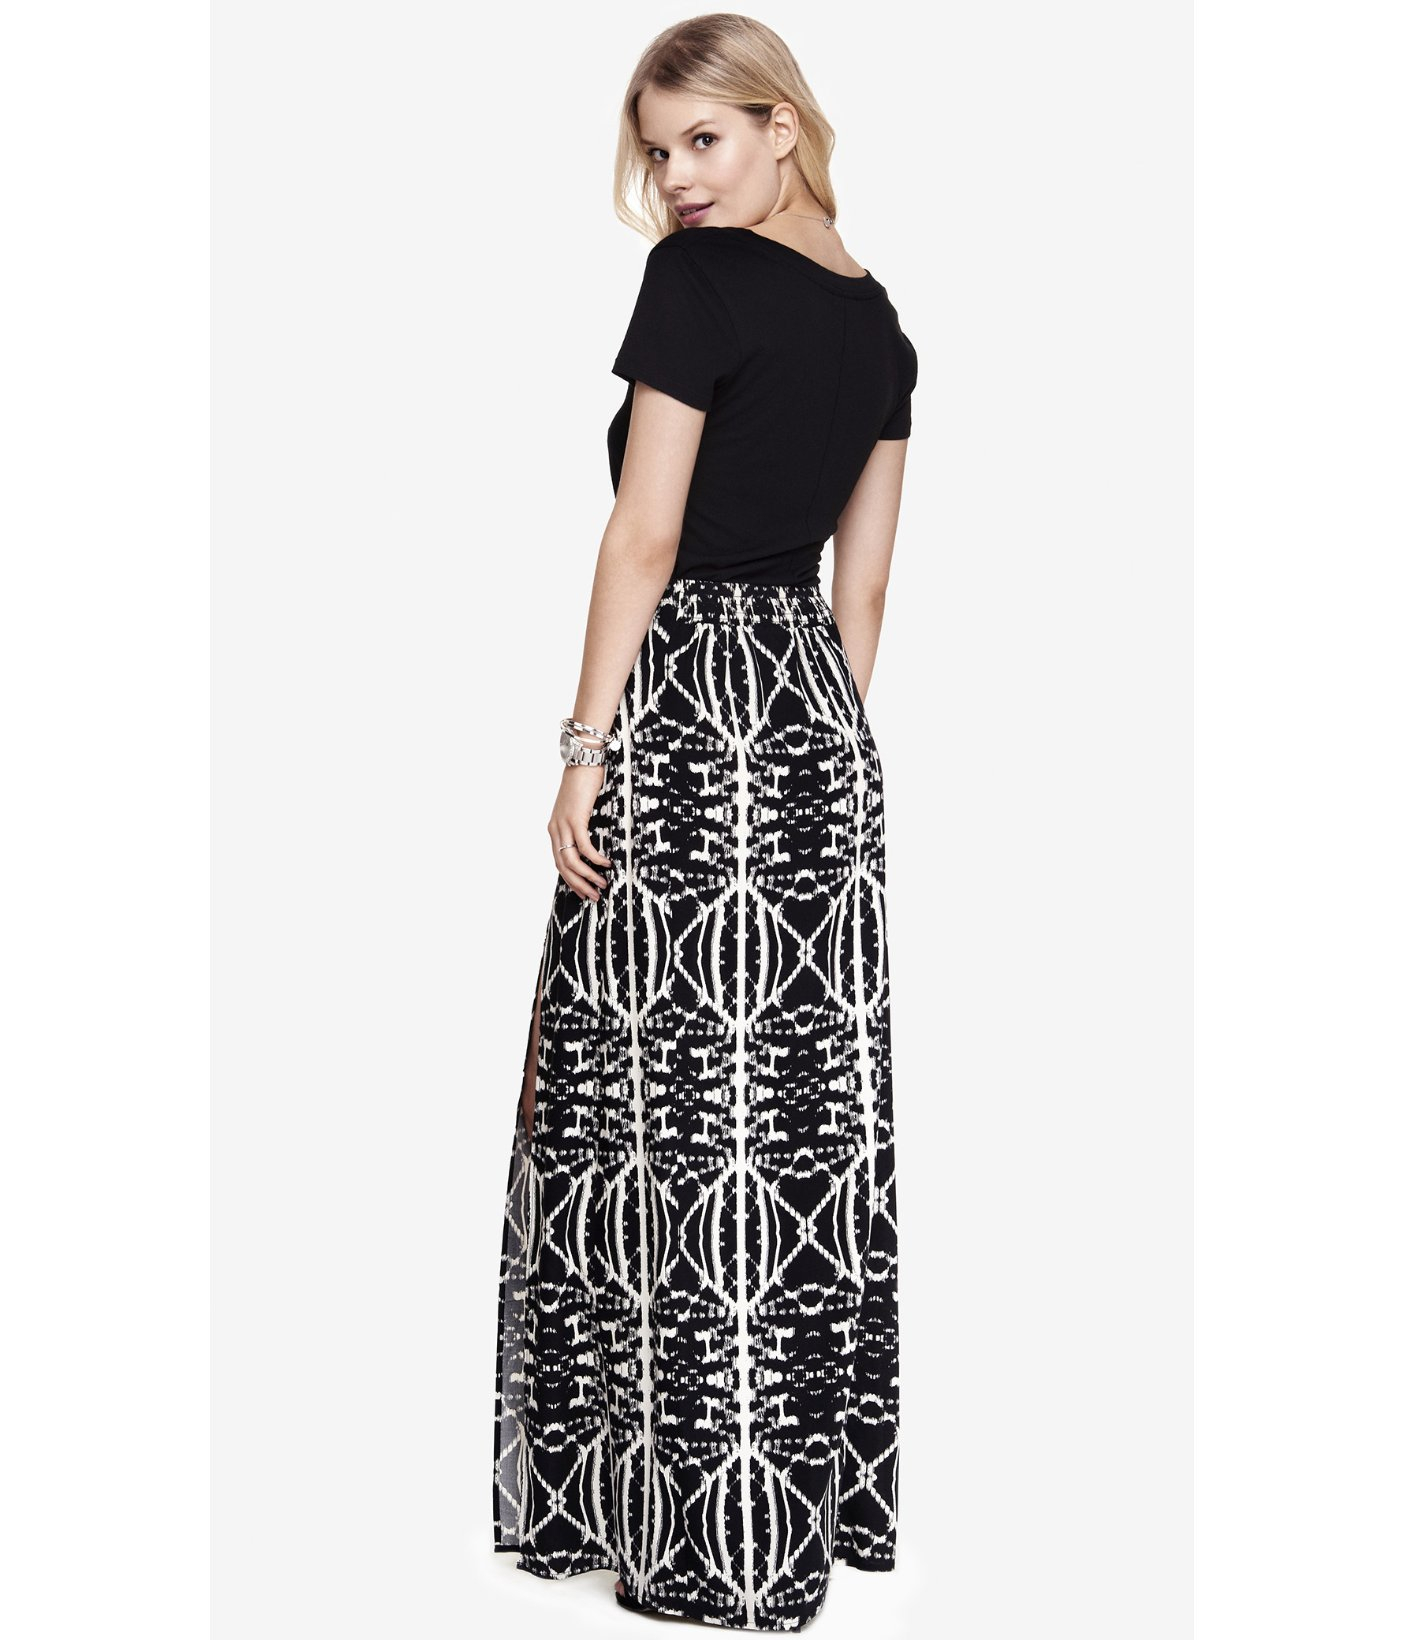 Lyst - Express High Waisted Side Slit Woven Maxi Skirt - Aztec in Black